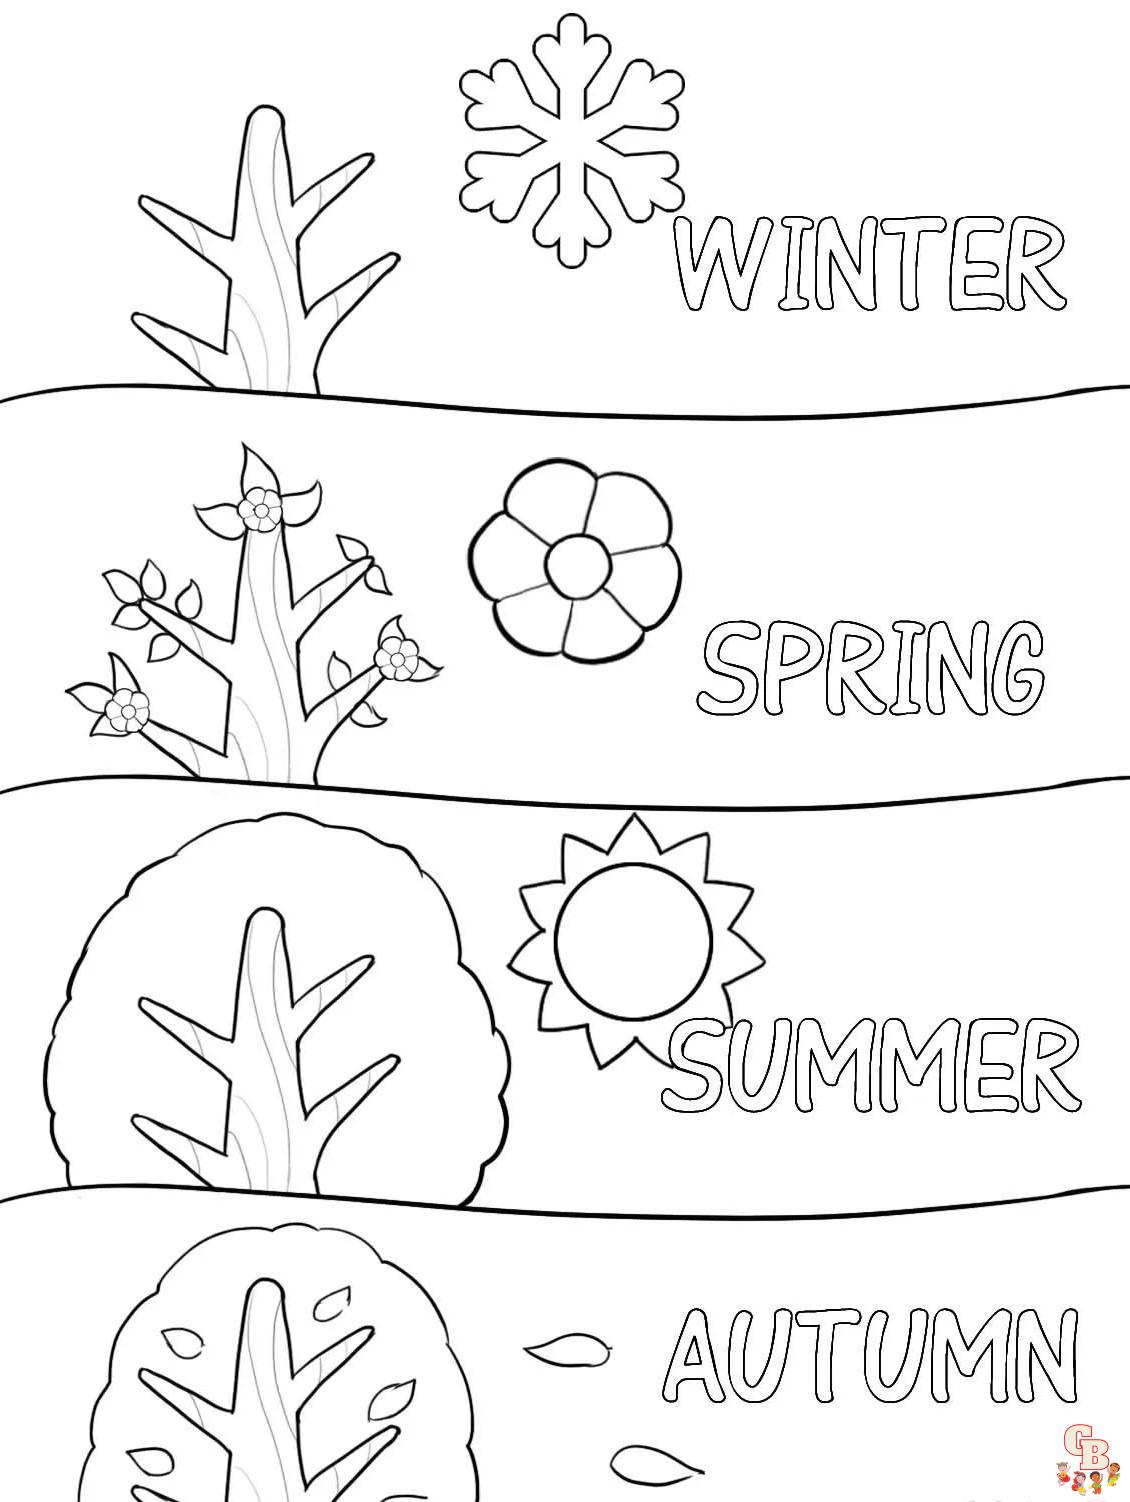 the-four-seasons-coloring-pages-for-preschoolers